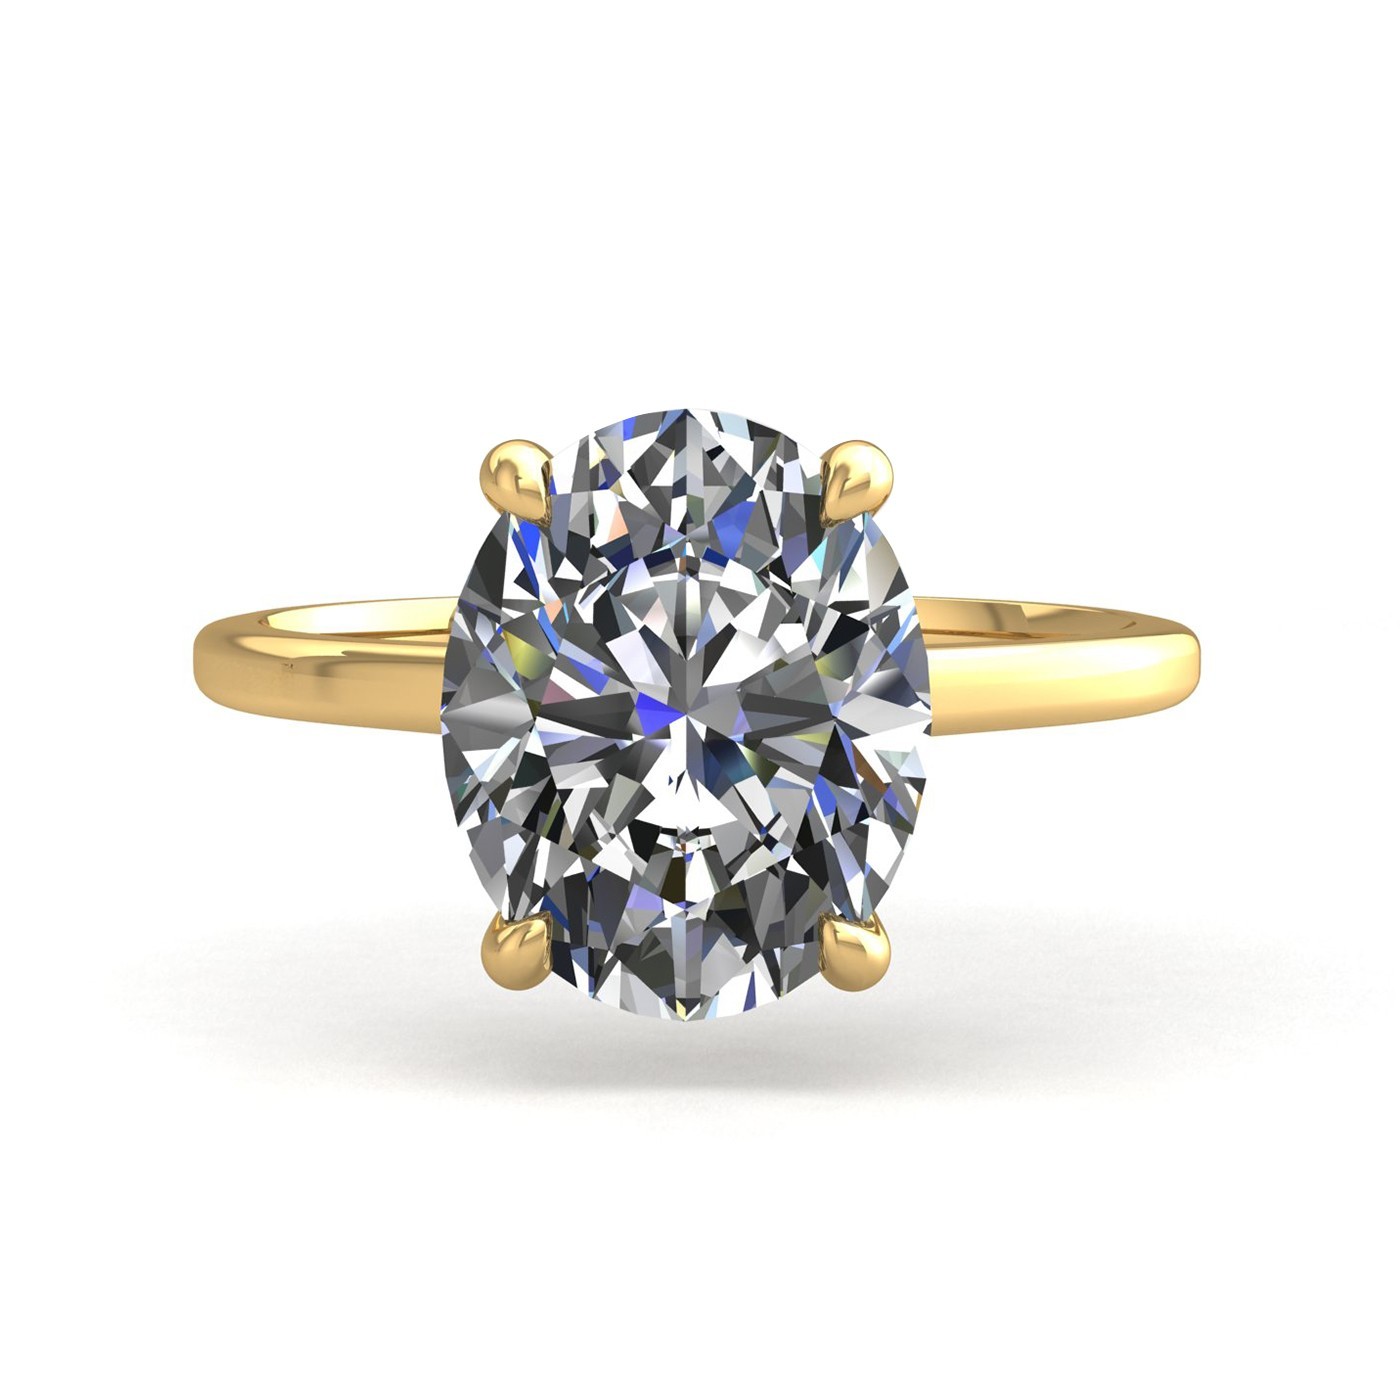 18k yellow gold  0,50 ct 4 prongs solitaire oval cut diamond engagement ring with whisper thin band Photos & images